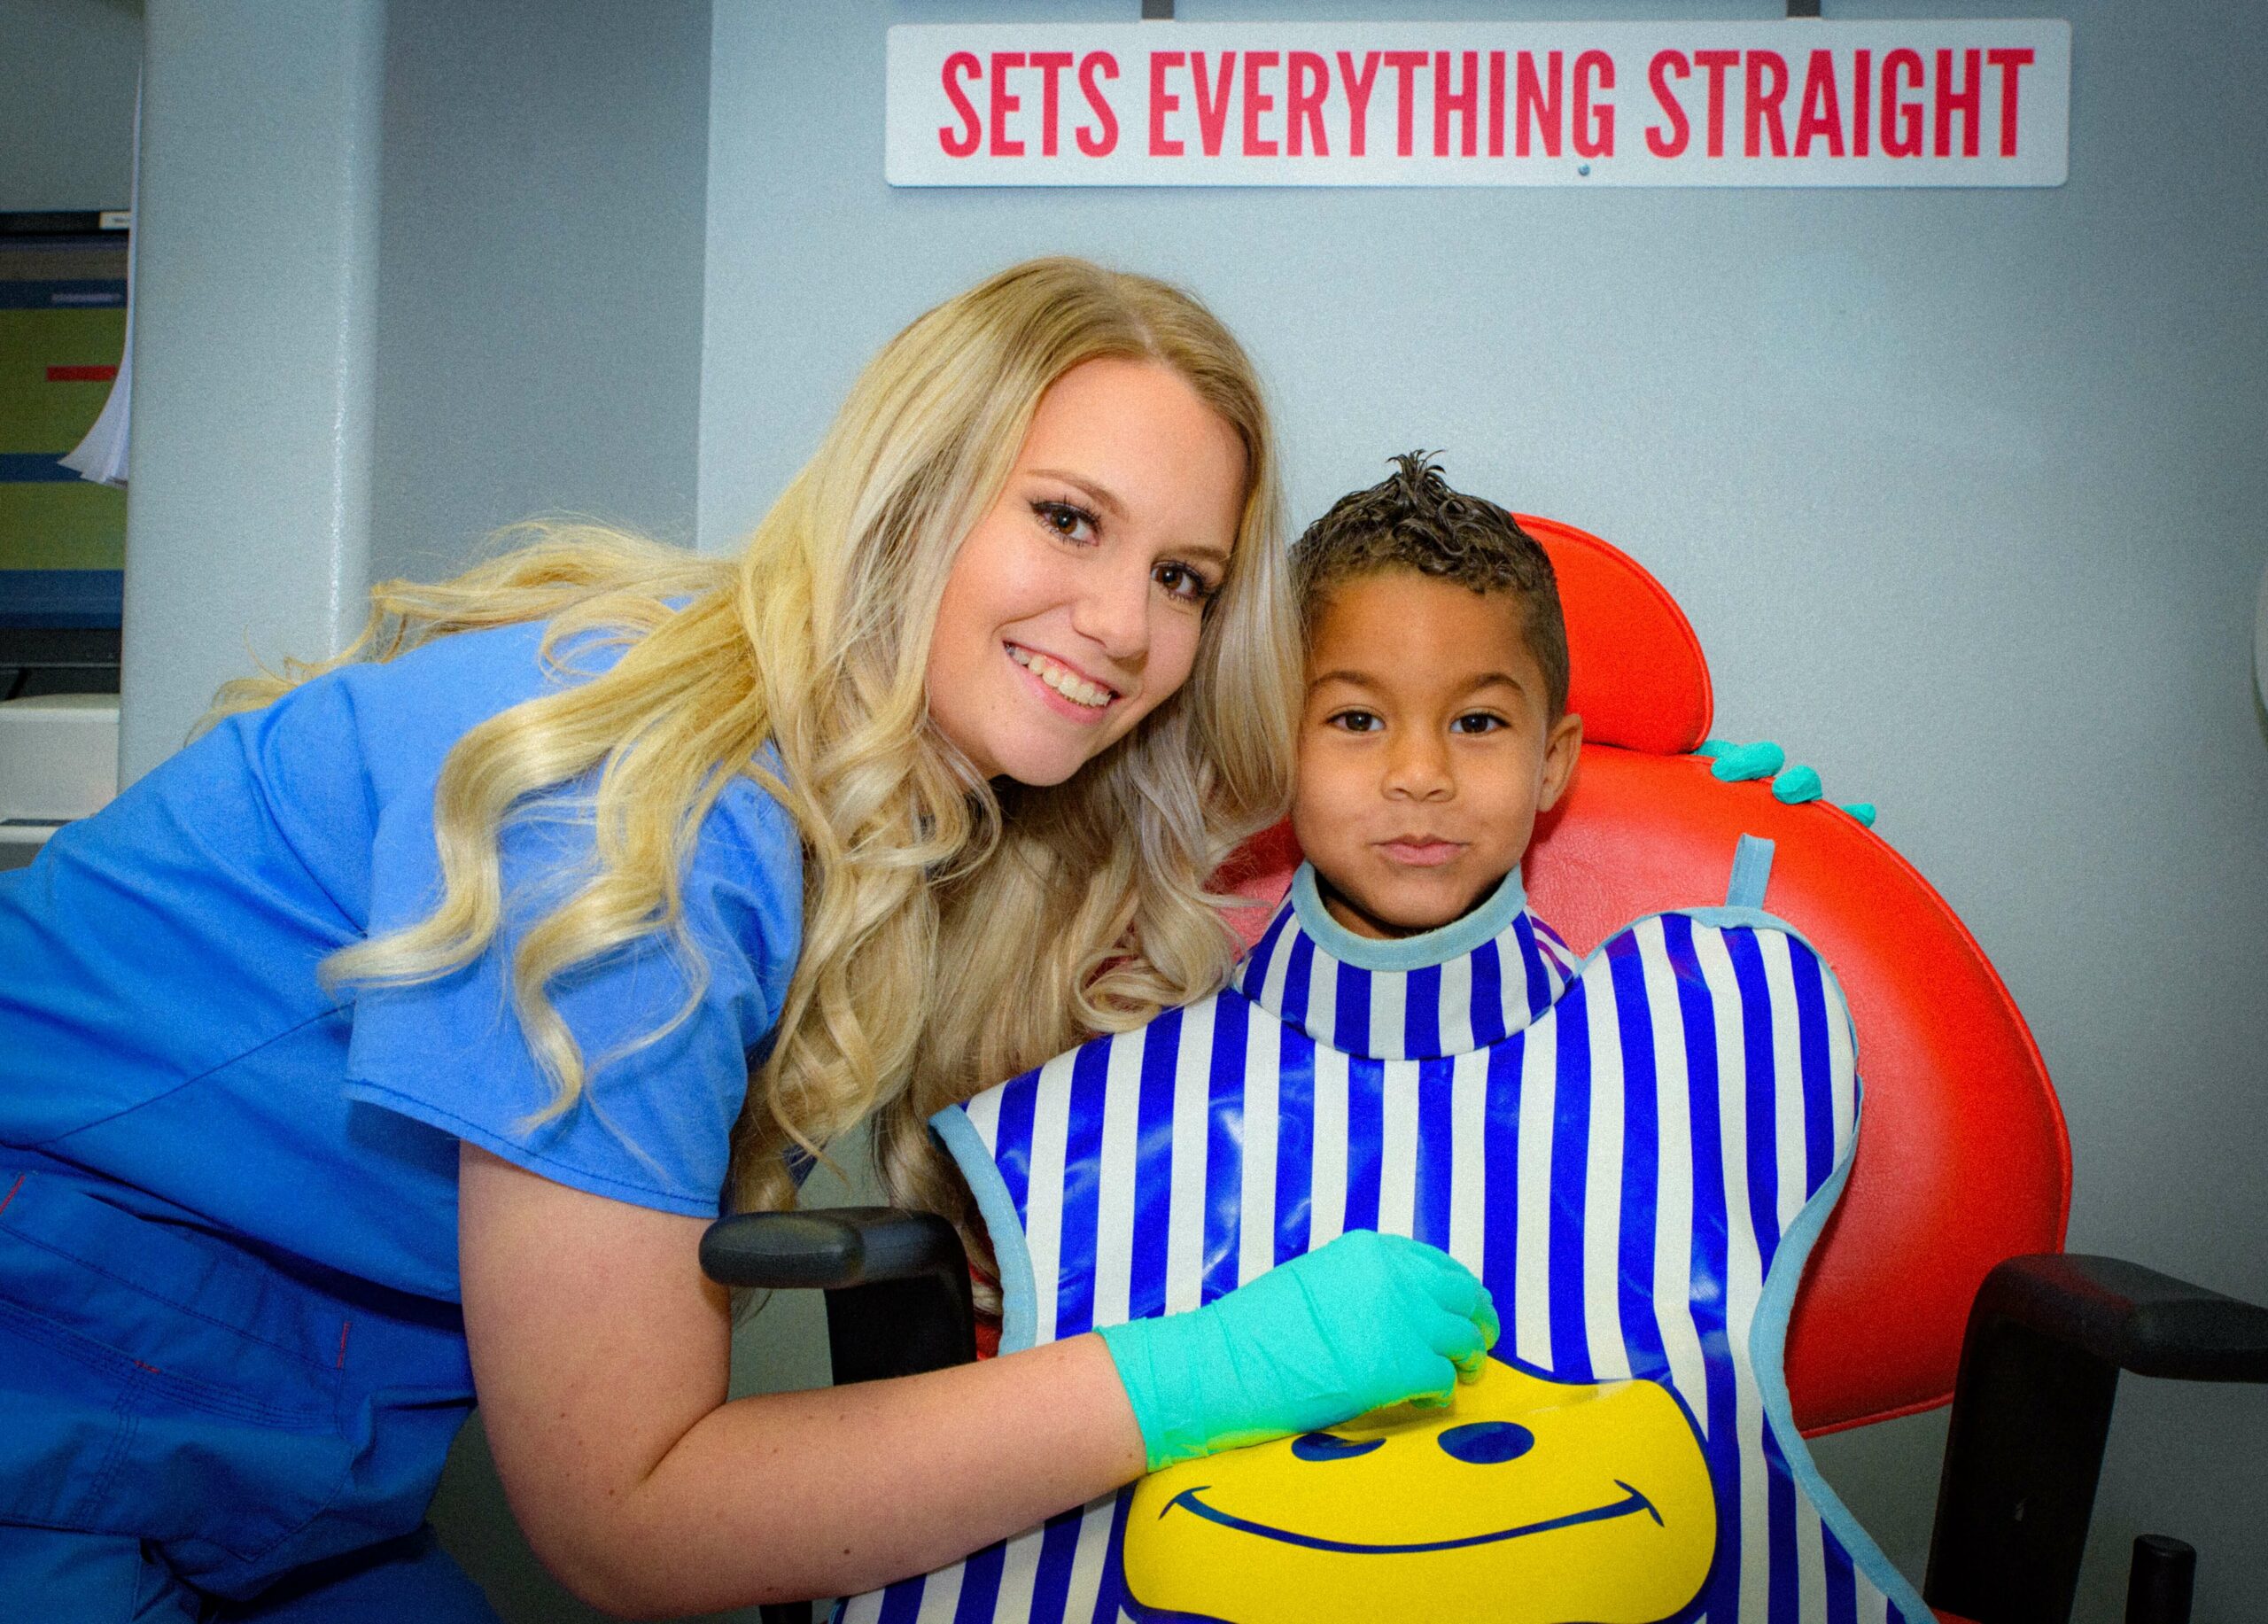 A smiling Route 32 Dental team member wearing office uniform and a young patient wearing the protective X-Ray apron with blue stripes and a smiley face print, sitting on a red dentist chair